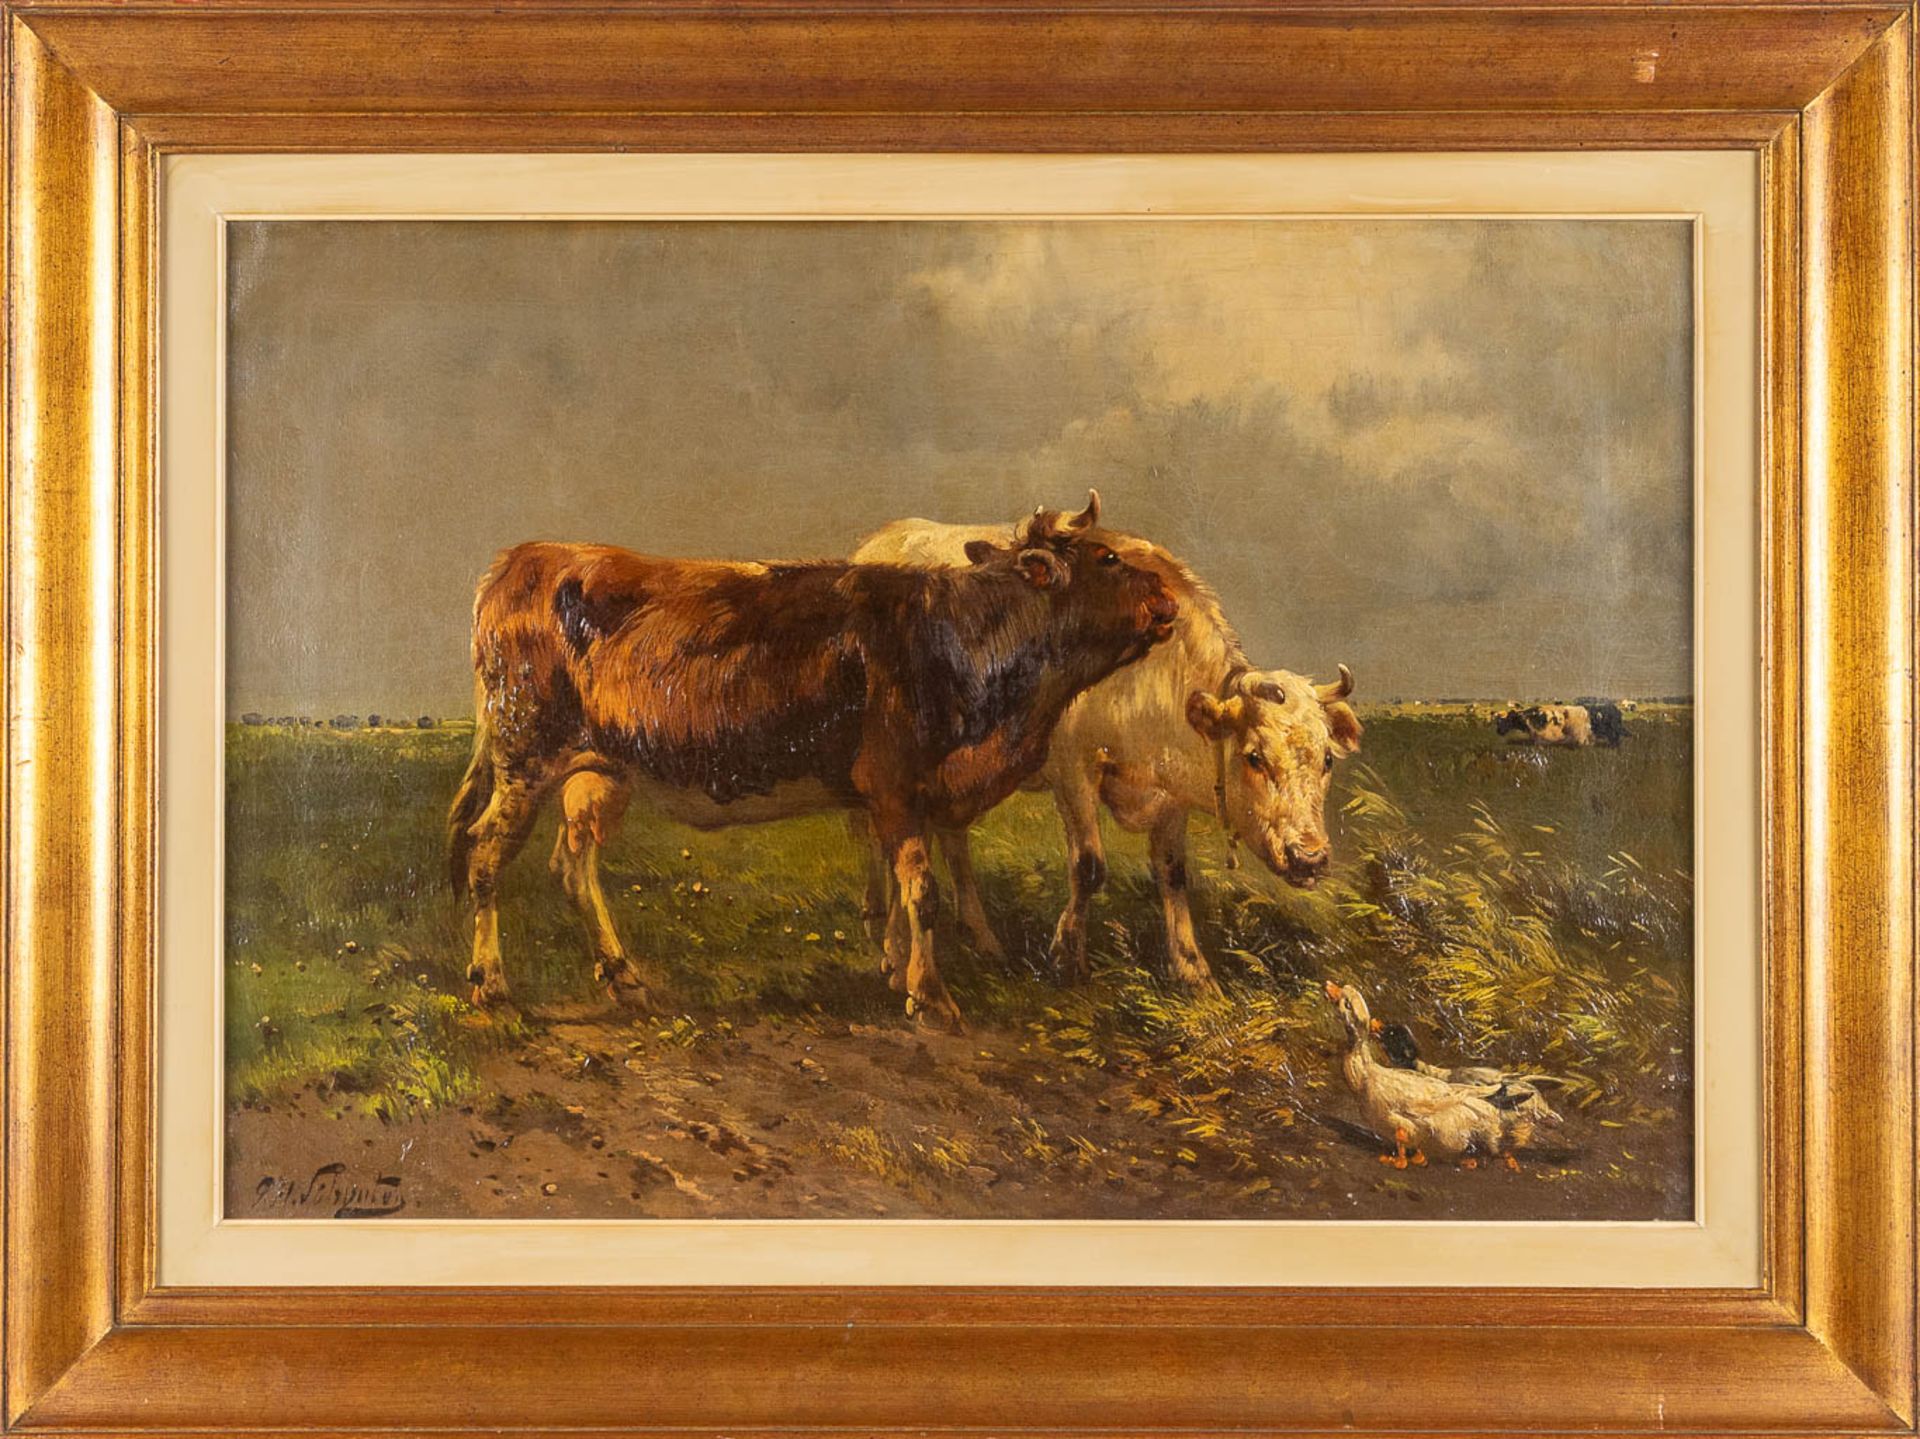 Henry SCHOUTEN (1857/64-1927) 'Pendant paintings, cows in a field' oil on canvas. (W: 80 x H: 55 cm) - Image 3 of 15